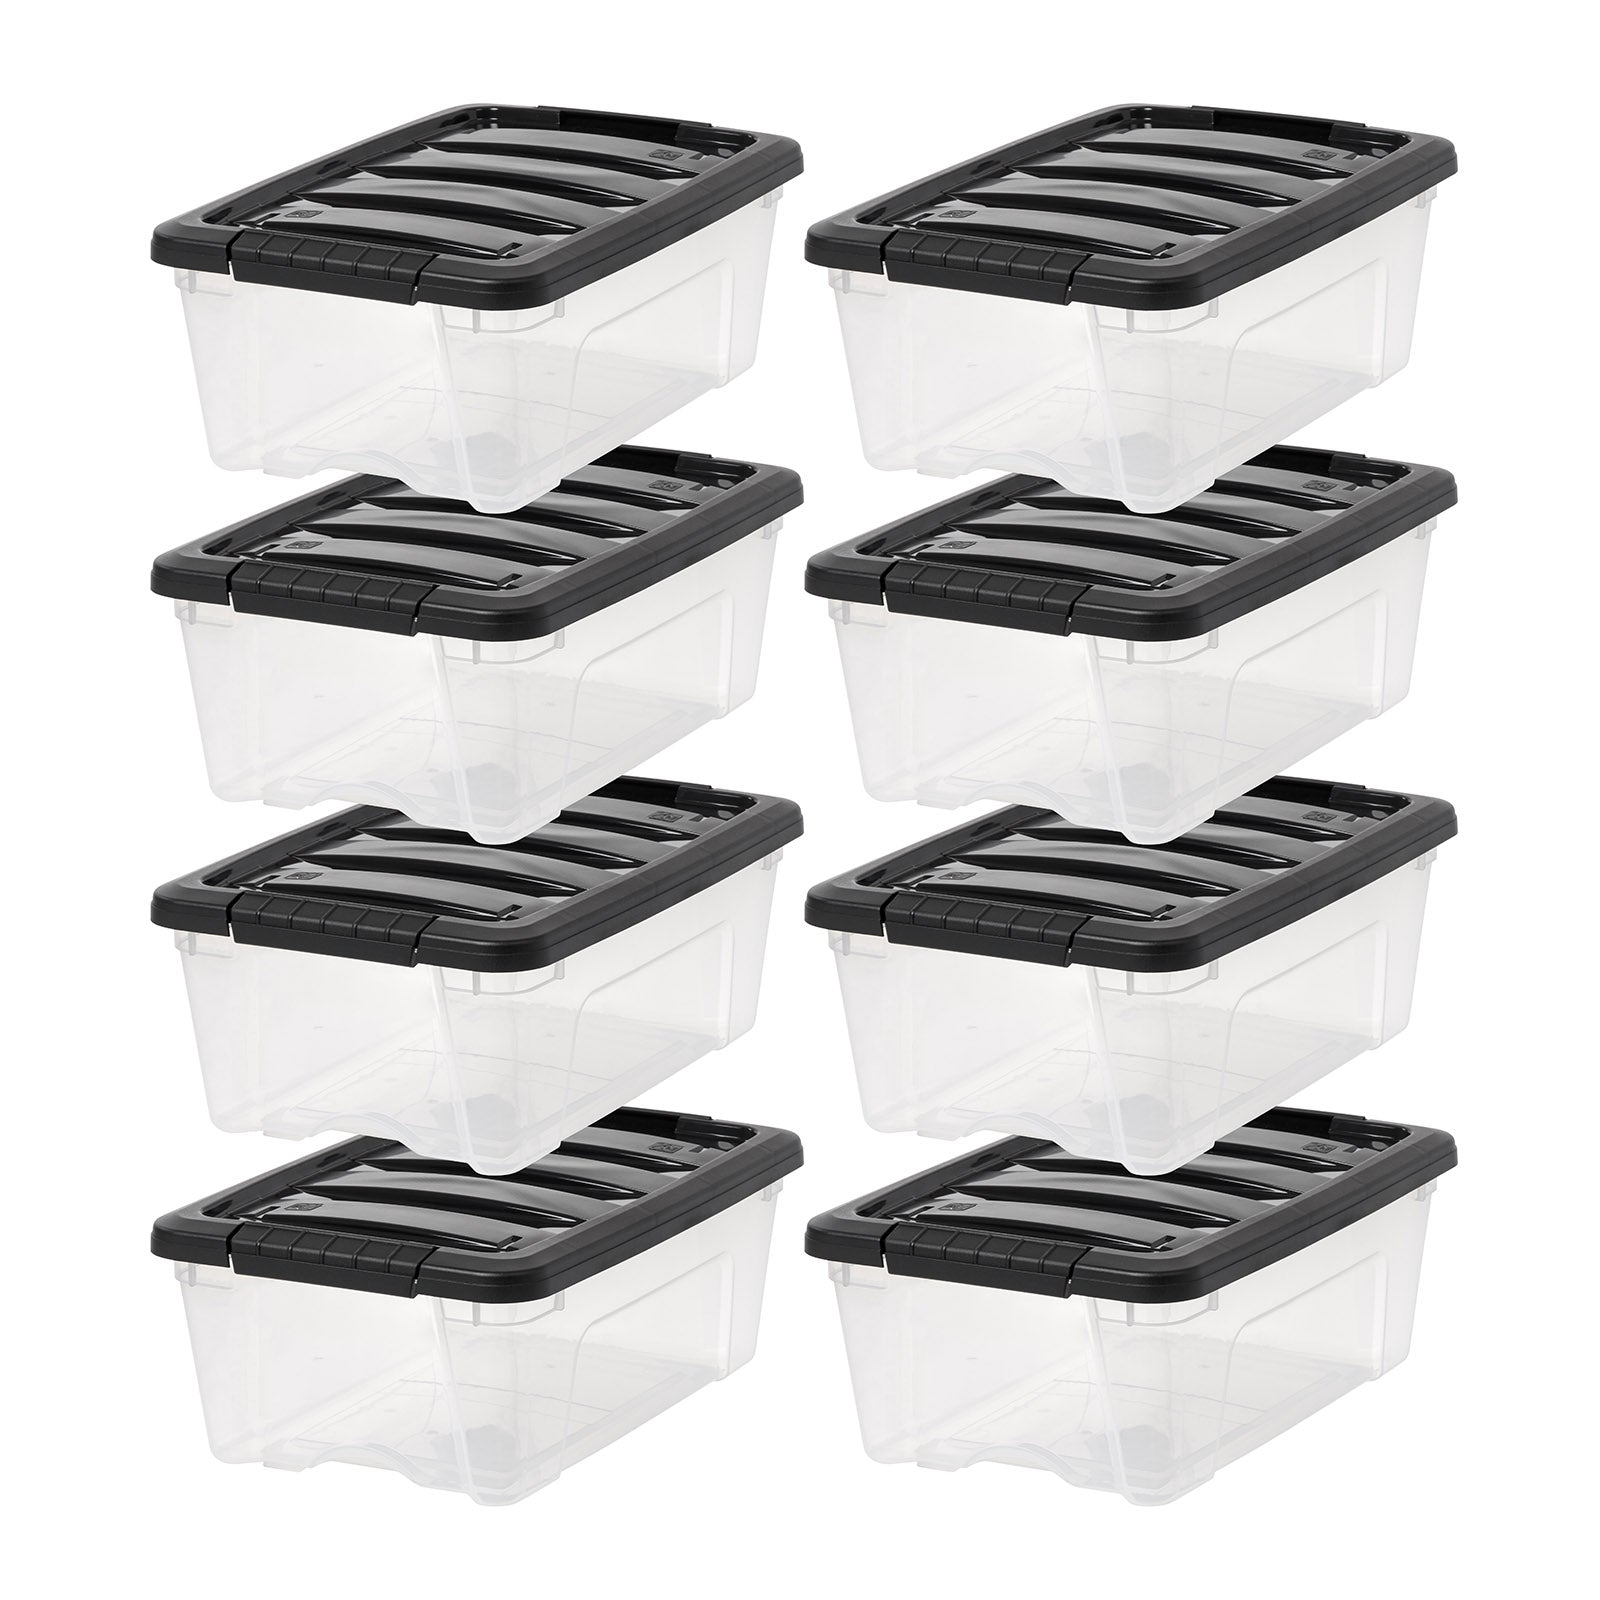 Iris USA, 5 Quart Stack & Pull Clear Plastic Storage Box with Buckles, Gray